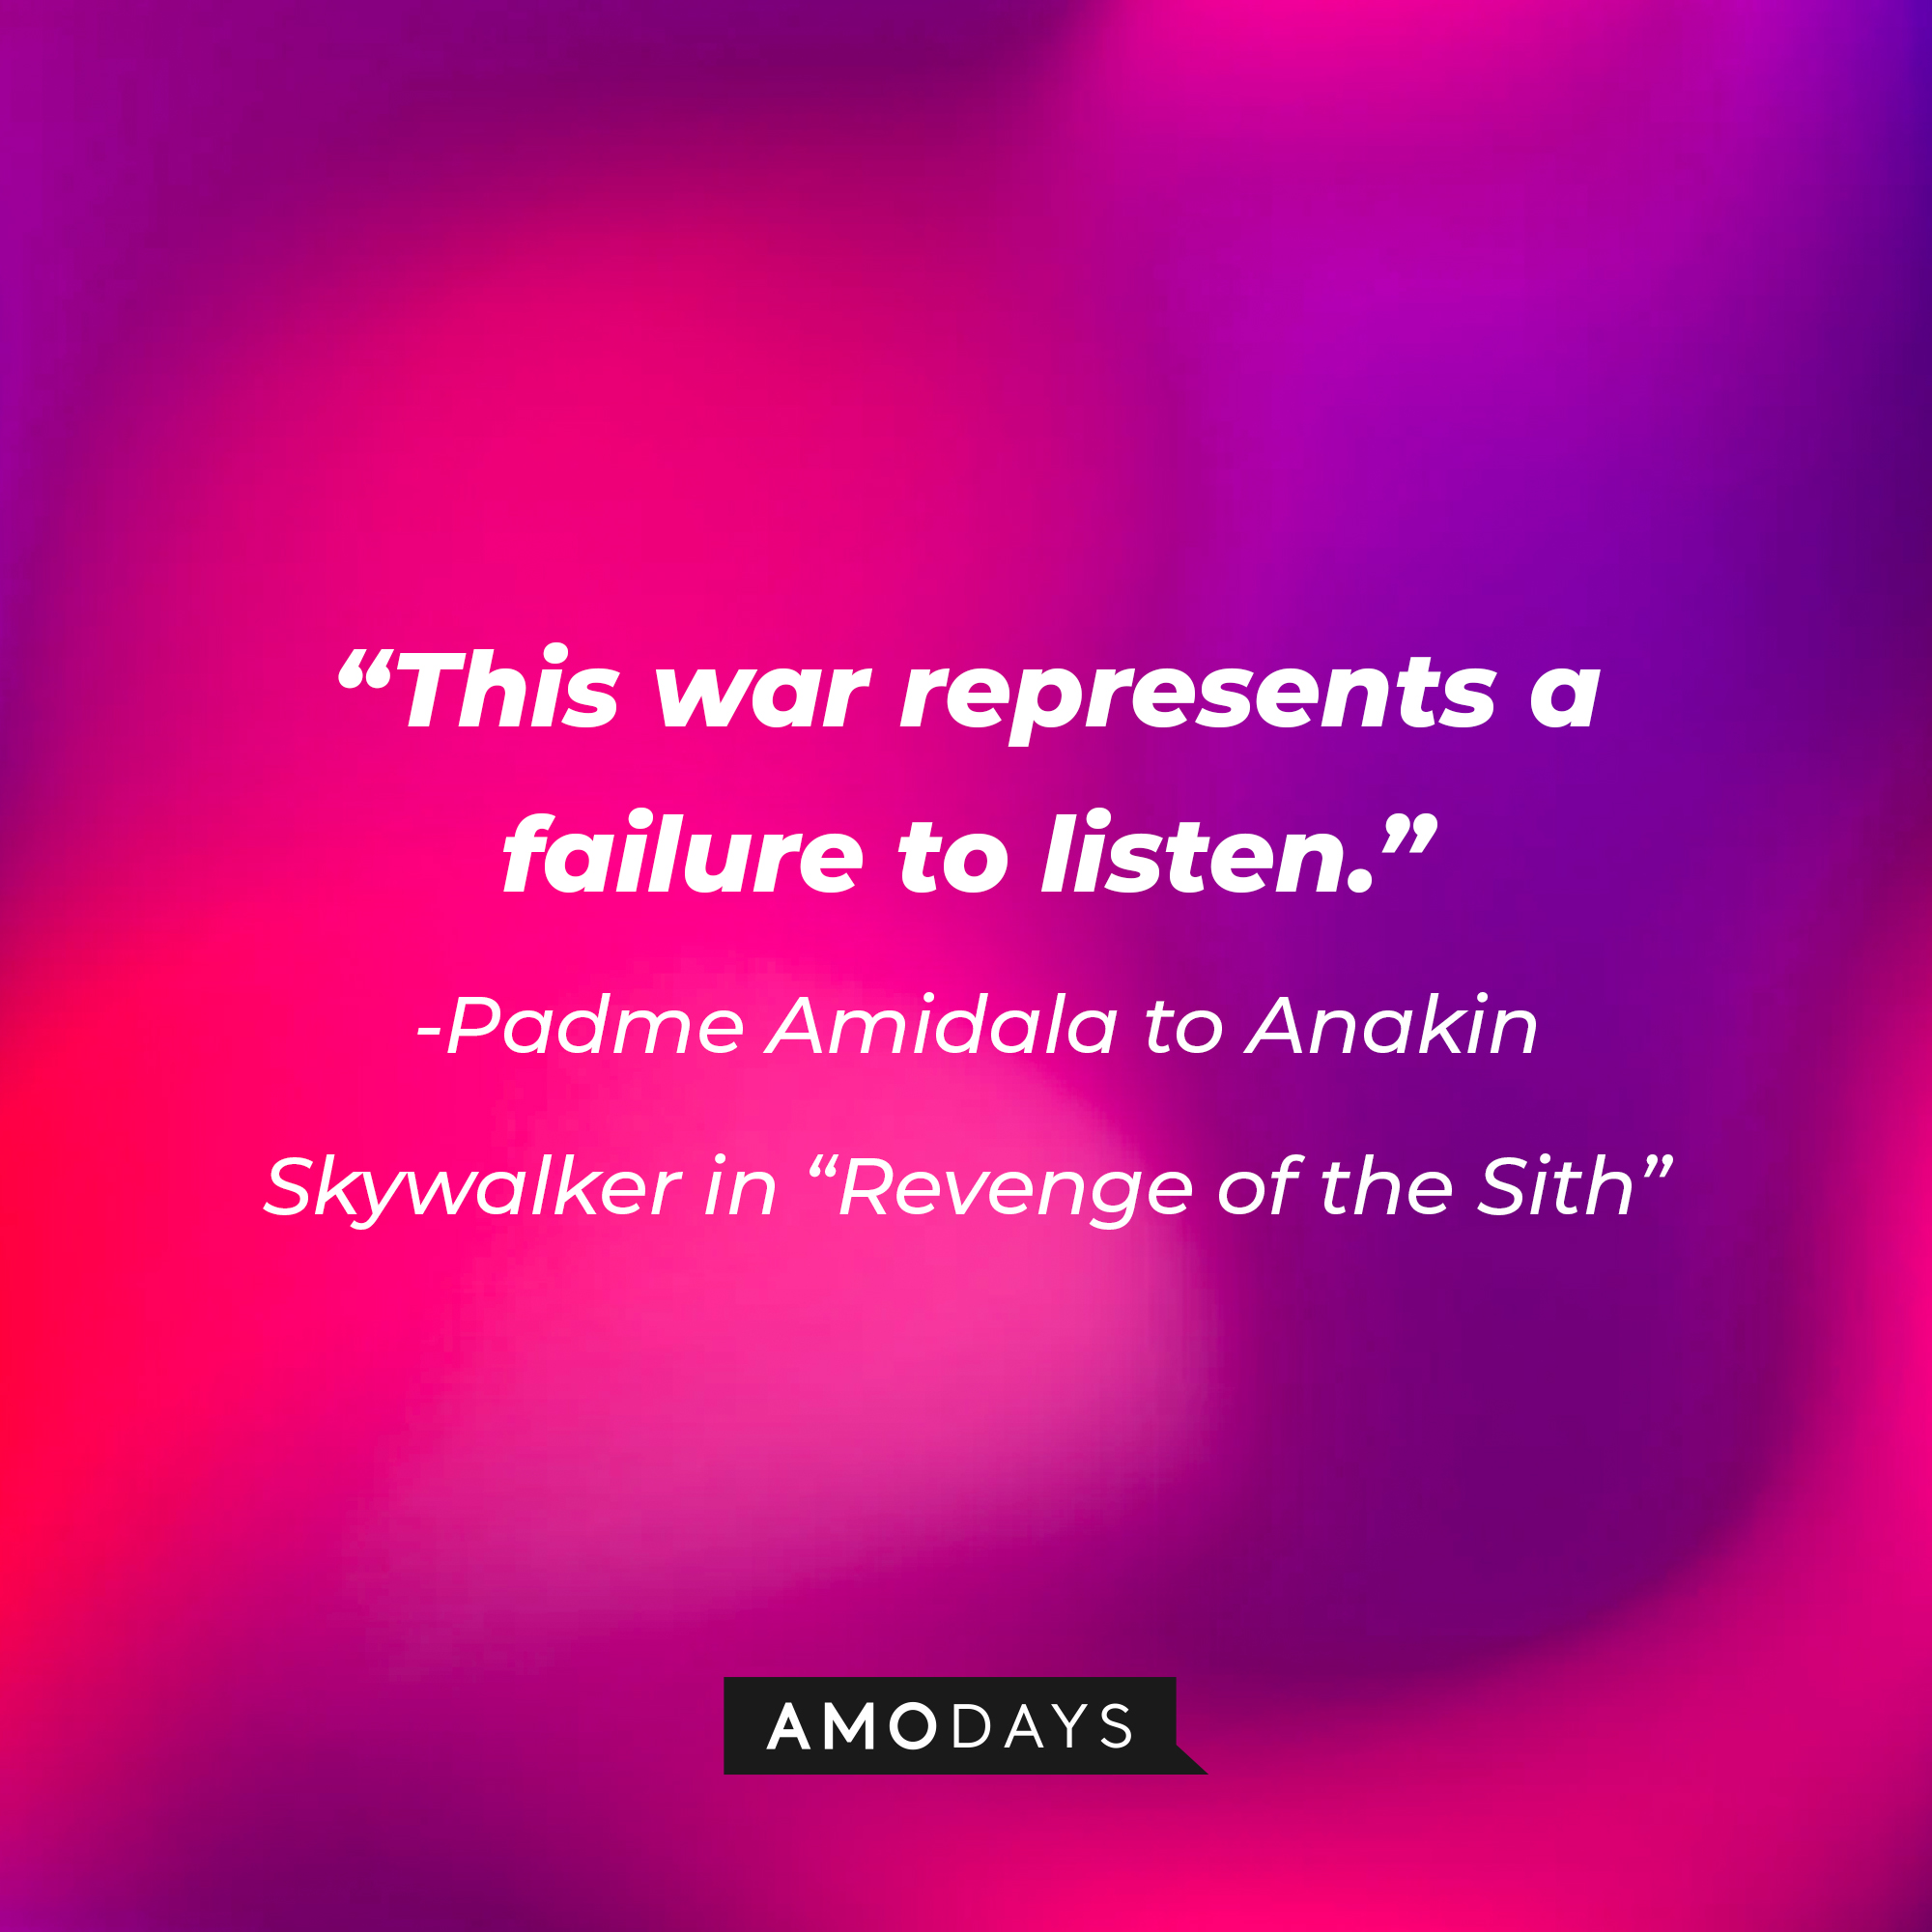 Padme Amidala's quote: "This war represents a failure to listen." | Source: AmoDays